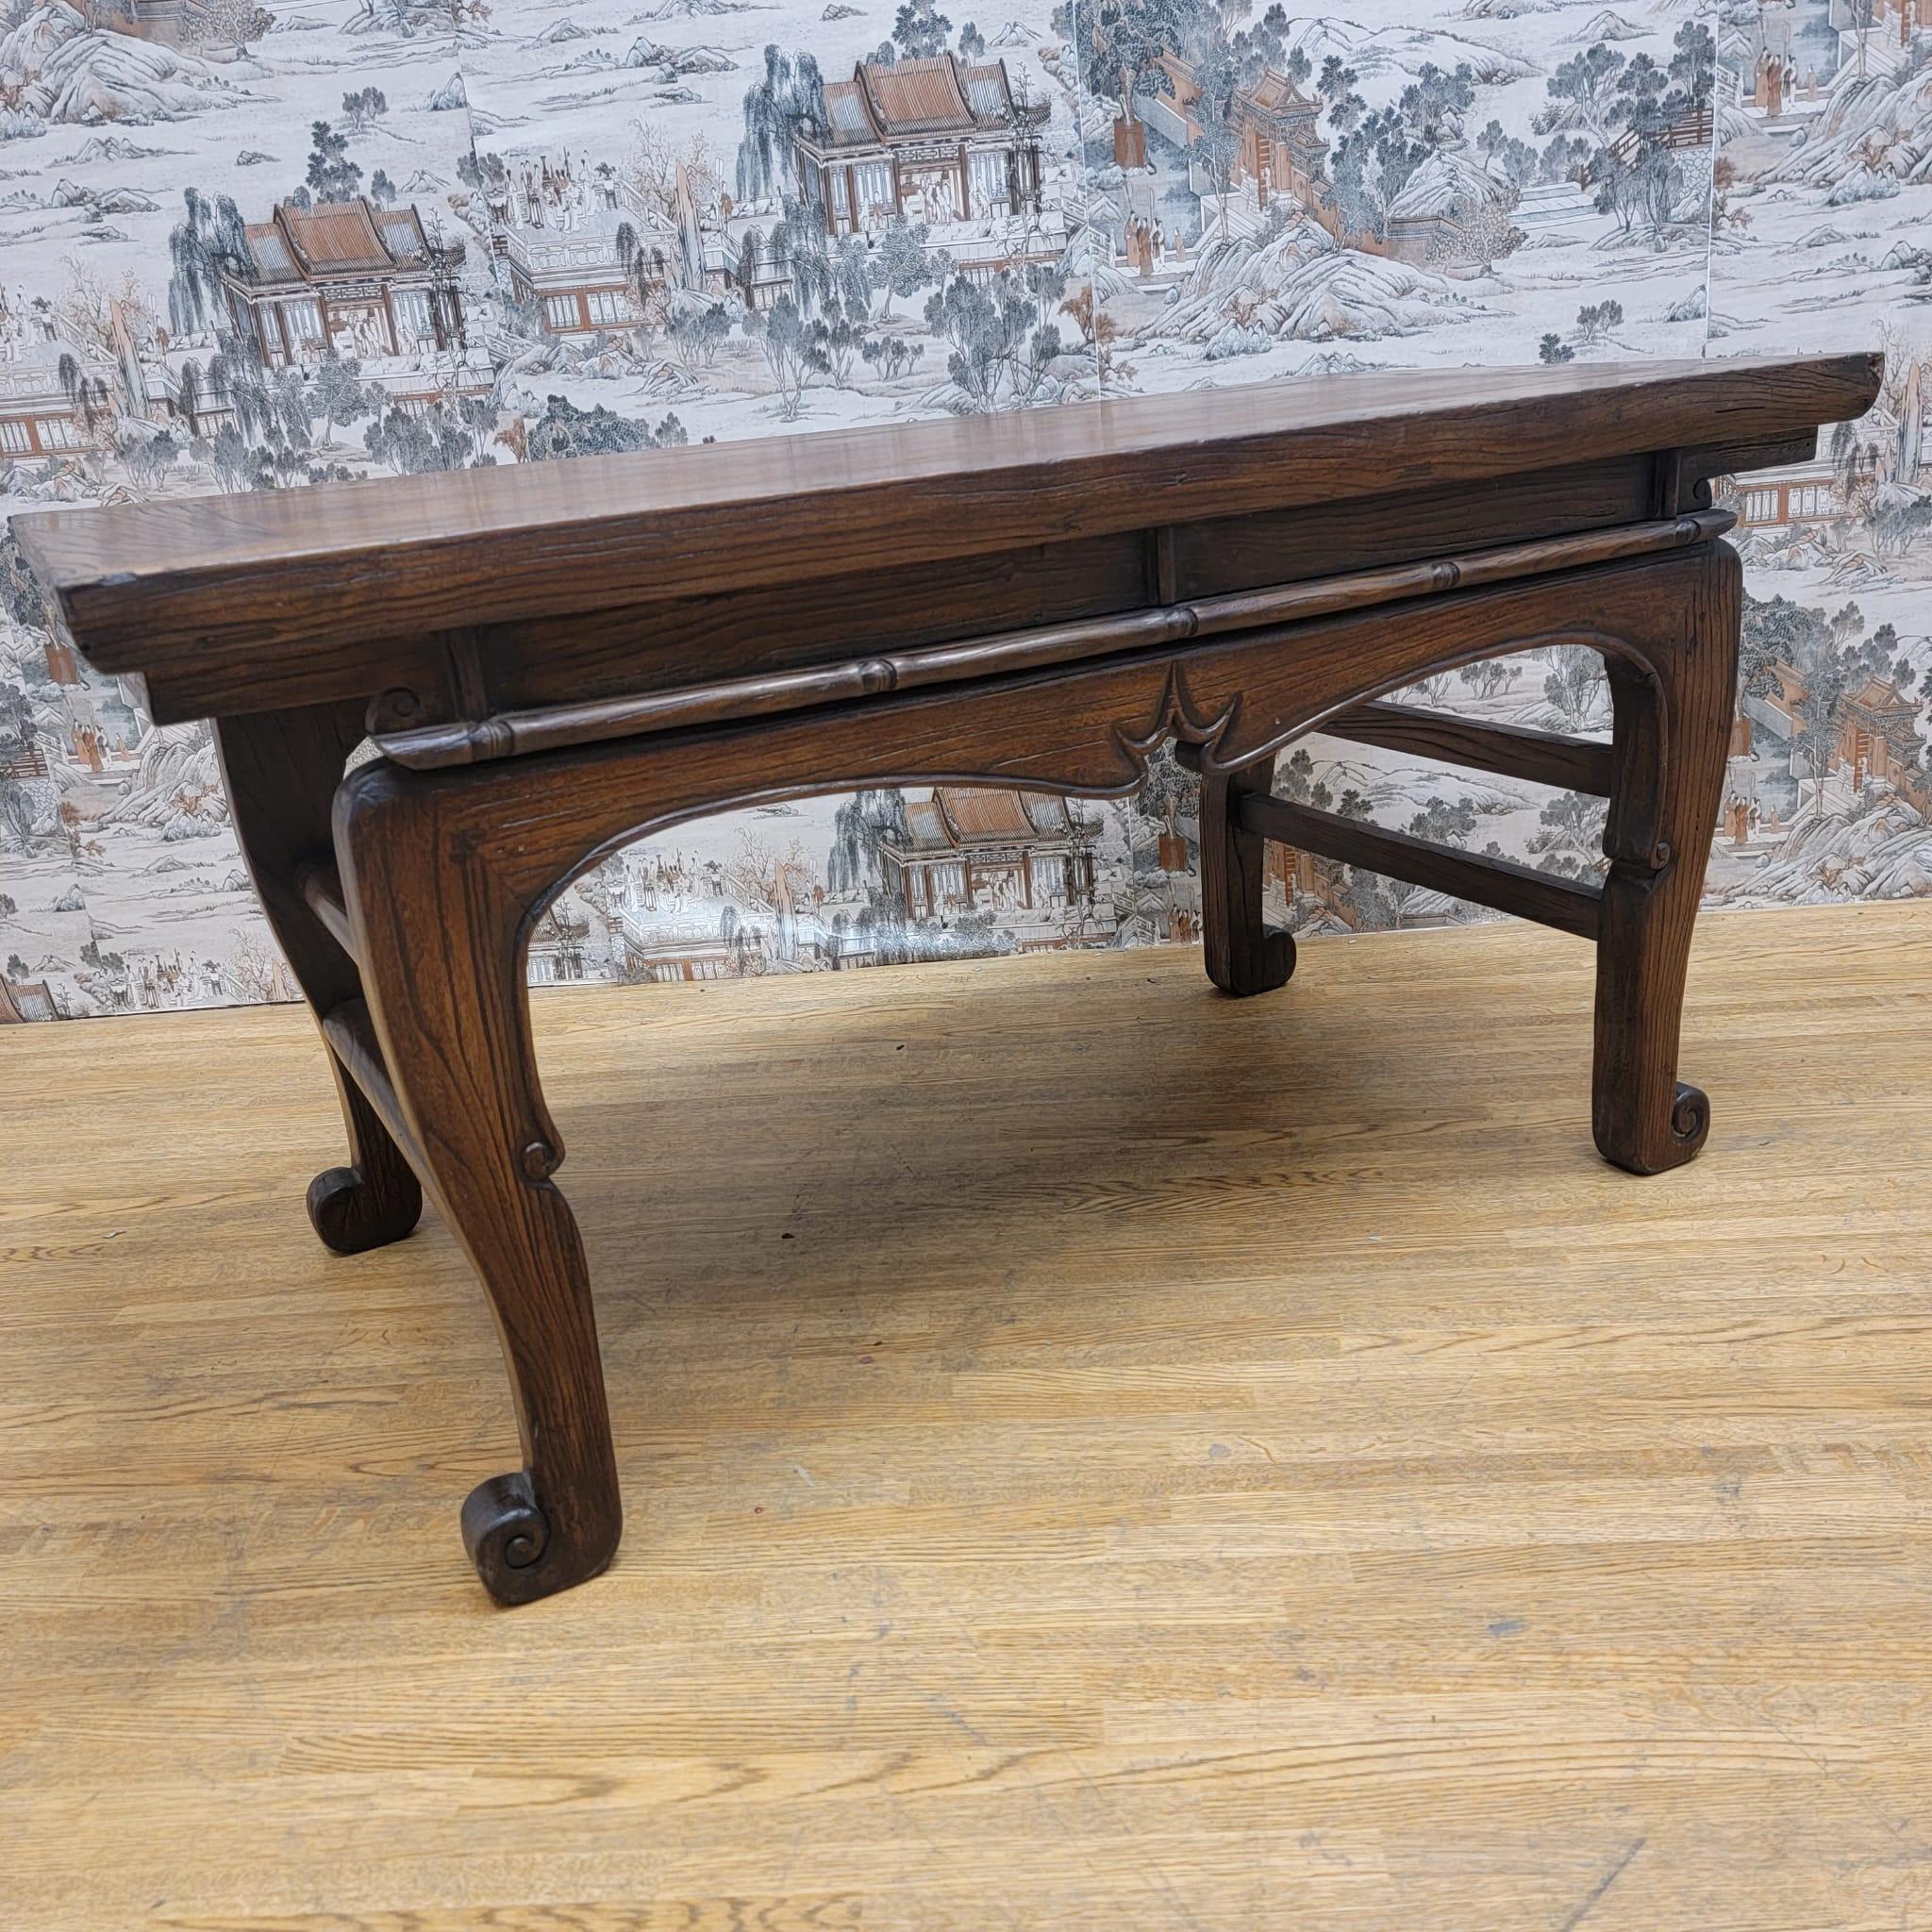 Antique Chinese Elm coffee table with original color and patina

This antique Chinese coffee table is hand carved and has all its original color and patina. A beautiful piece for any living area.

Circa:1900

Measures: H 21